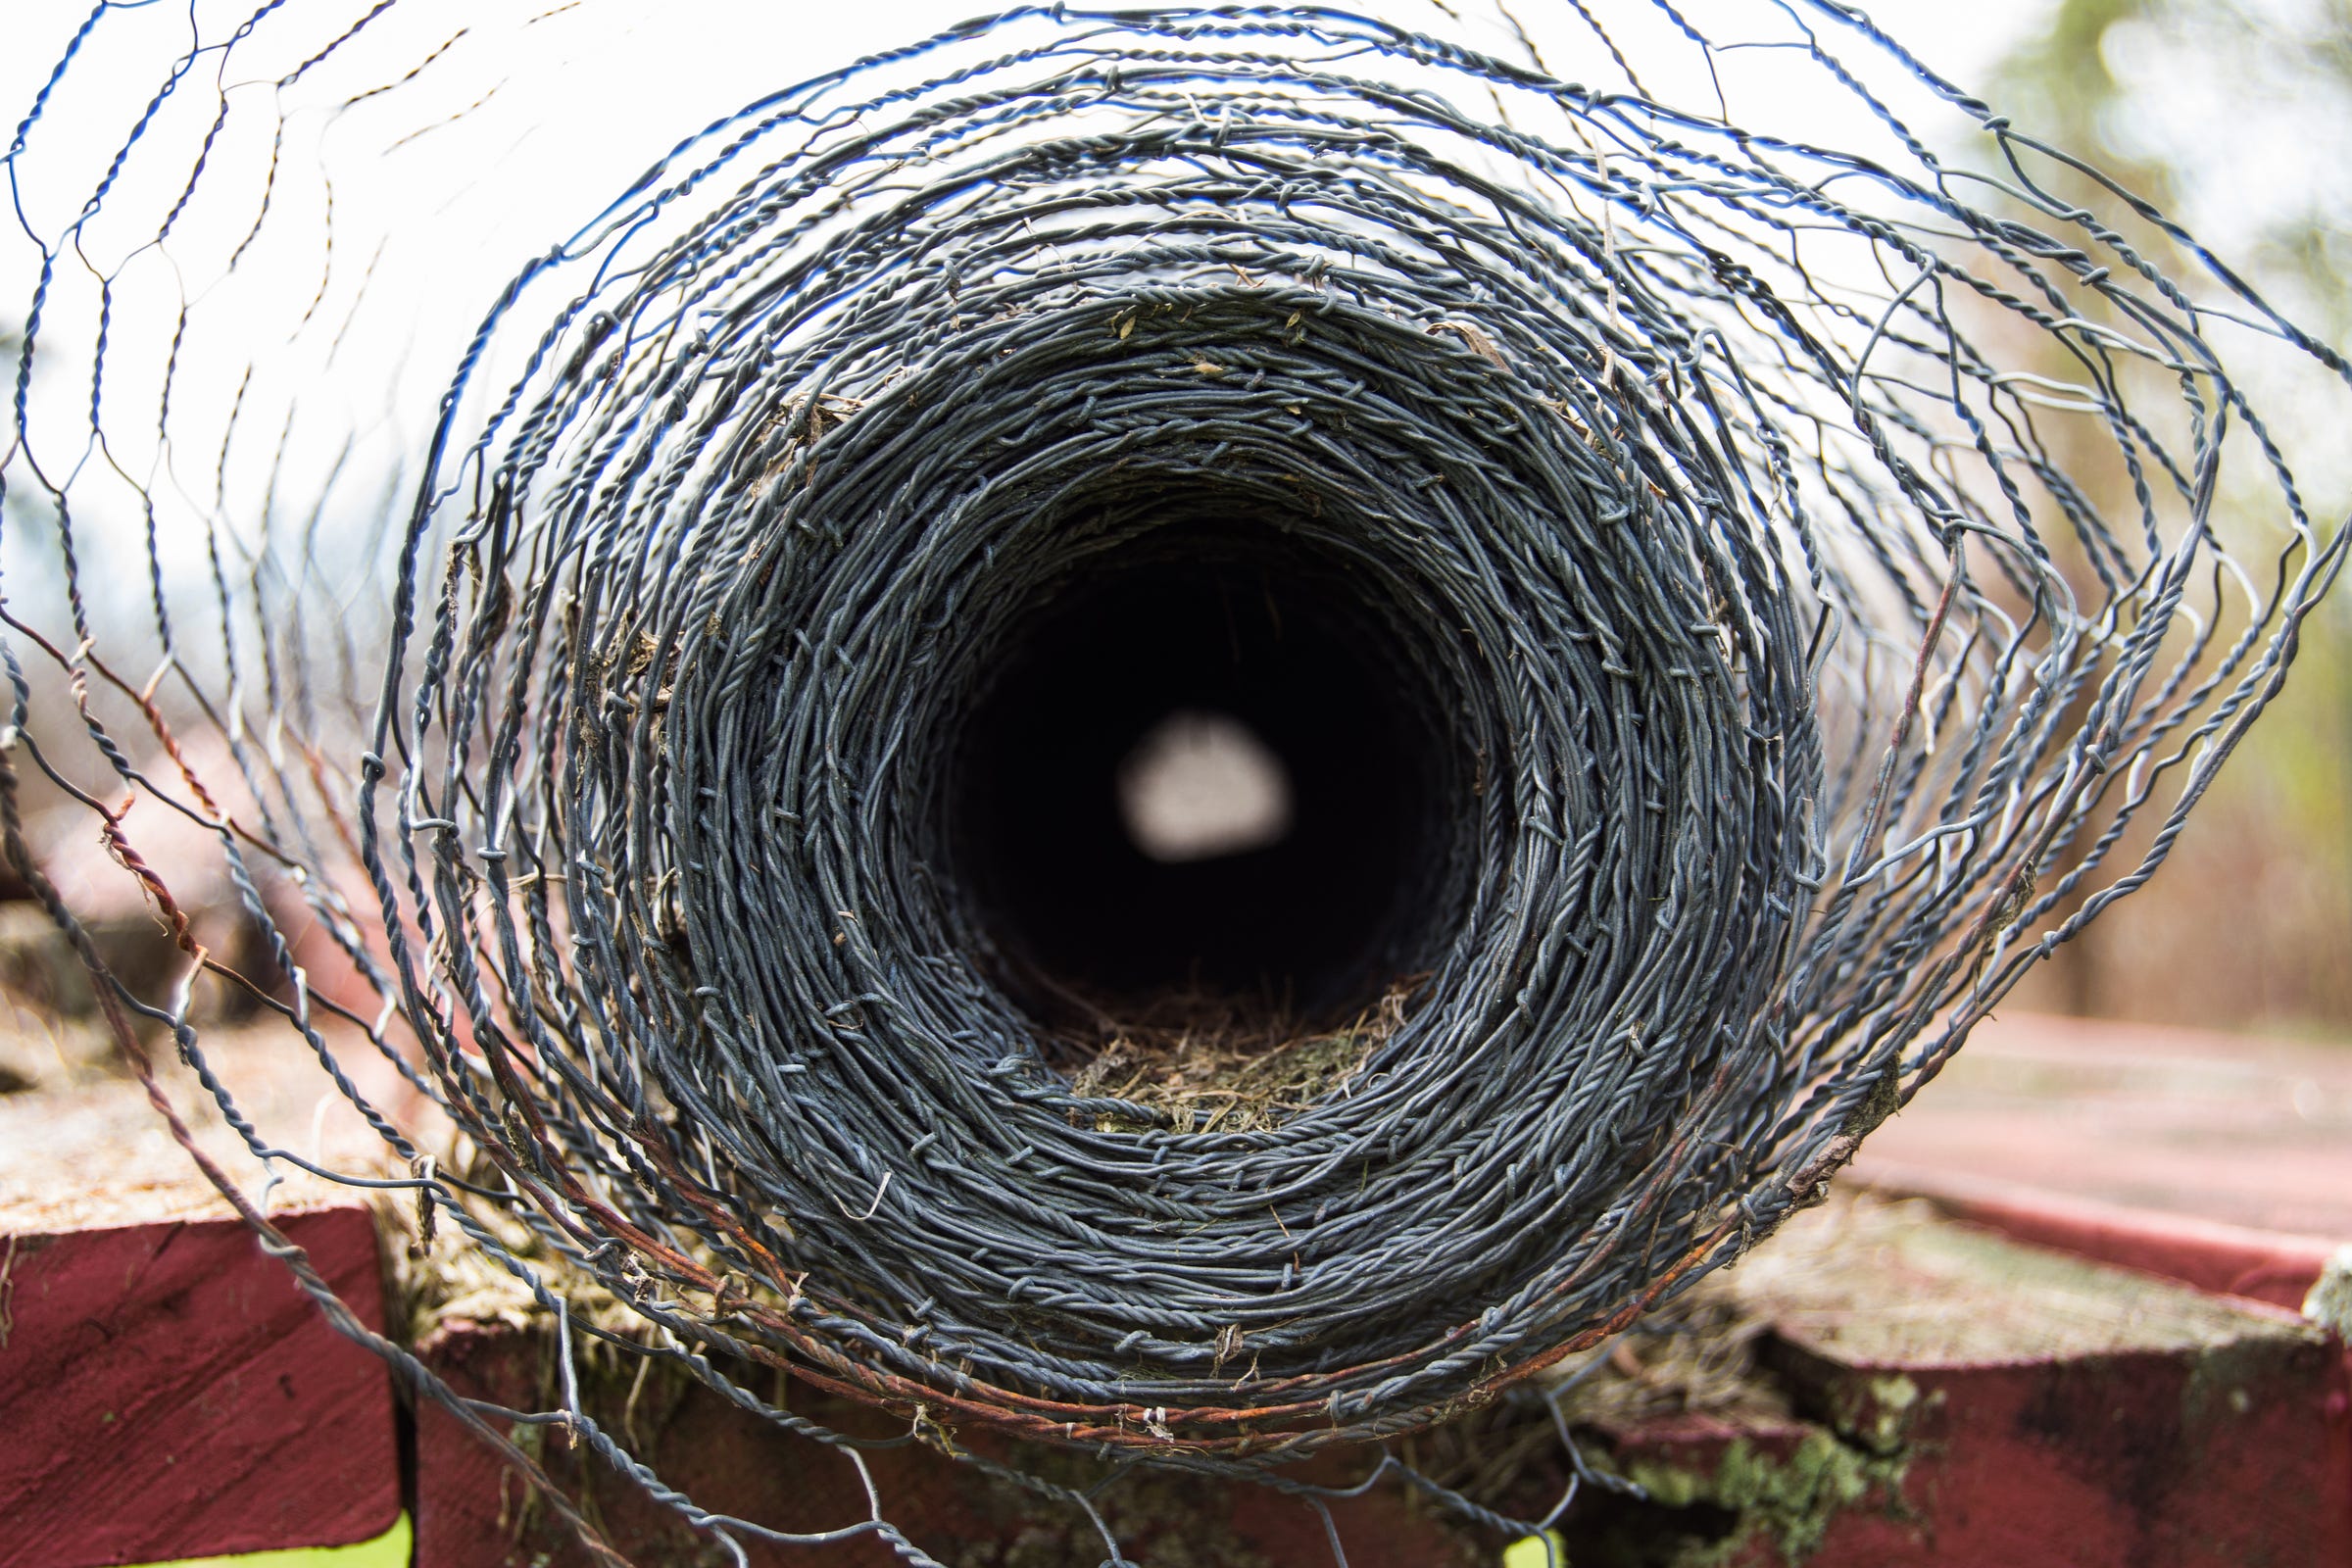 A bail of chicken wire unspooling on a fence